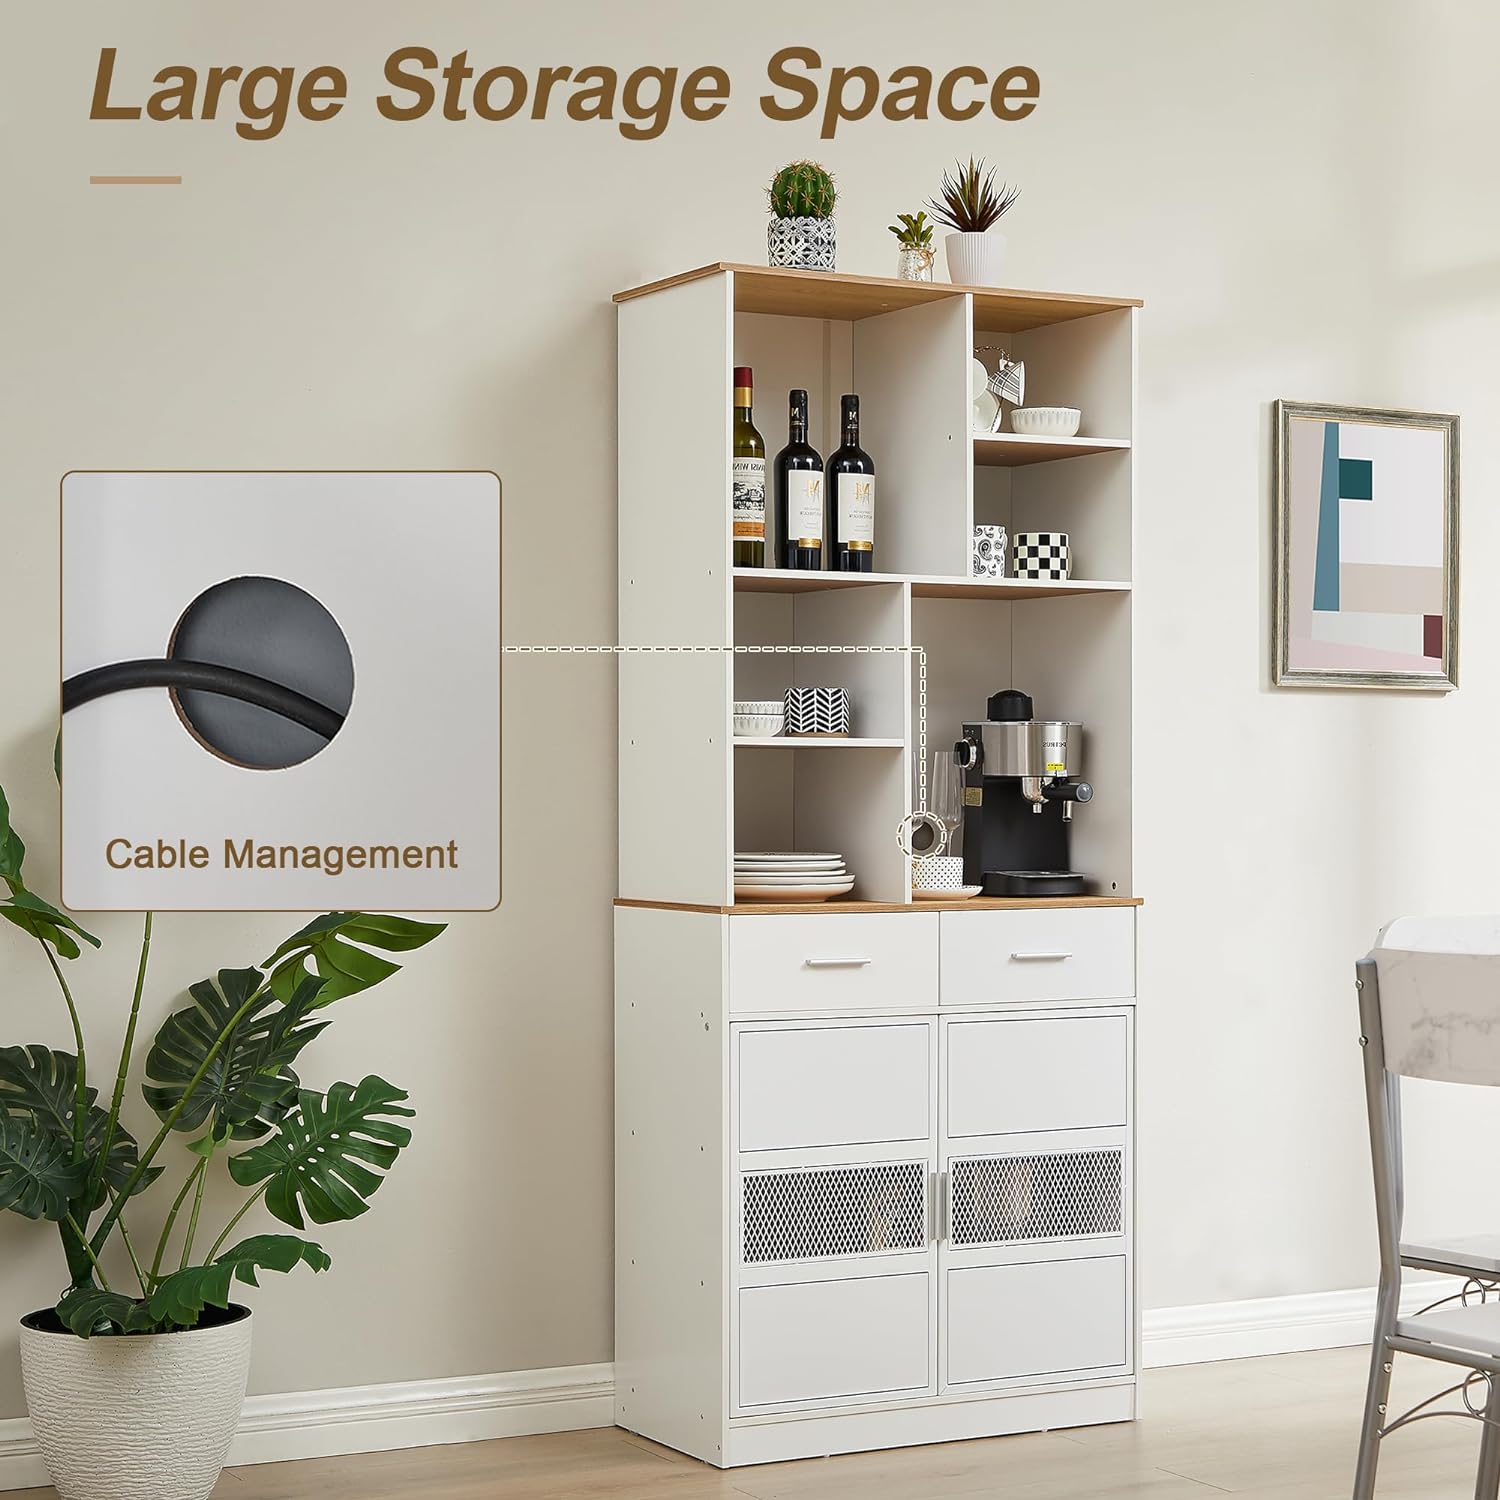 Storage Cabinets, Freestanding Cabinets